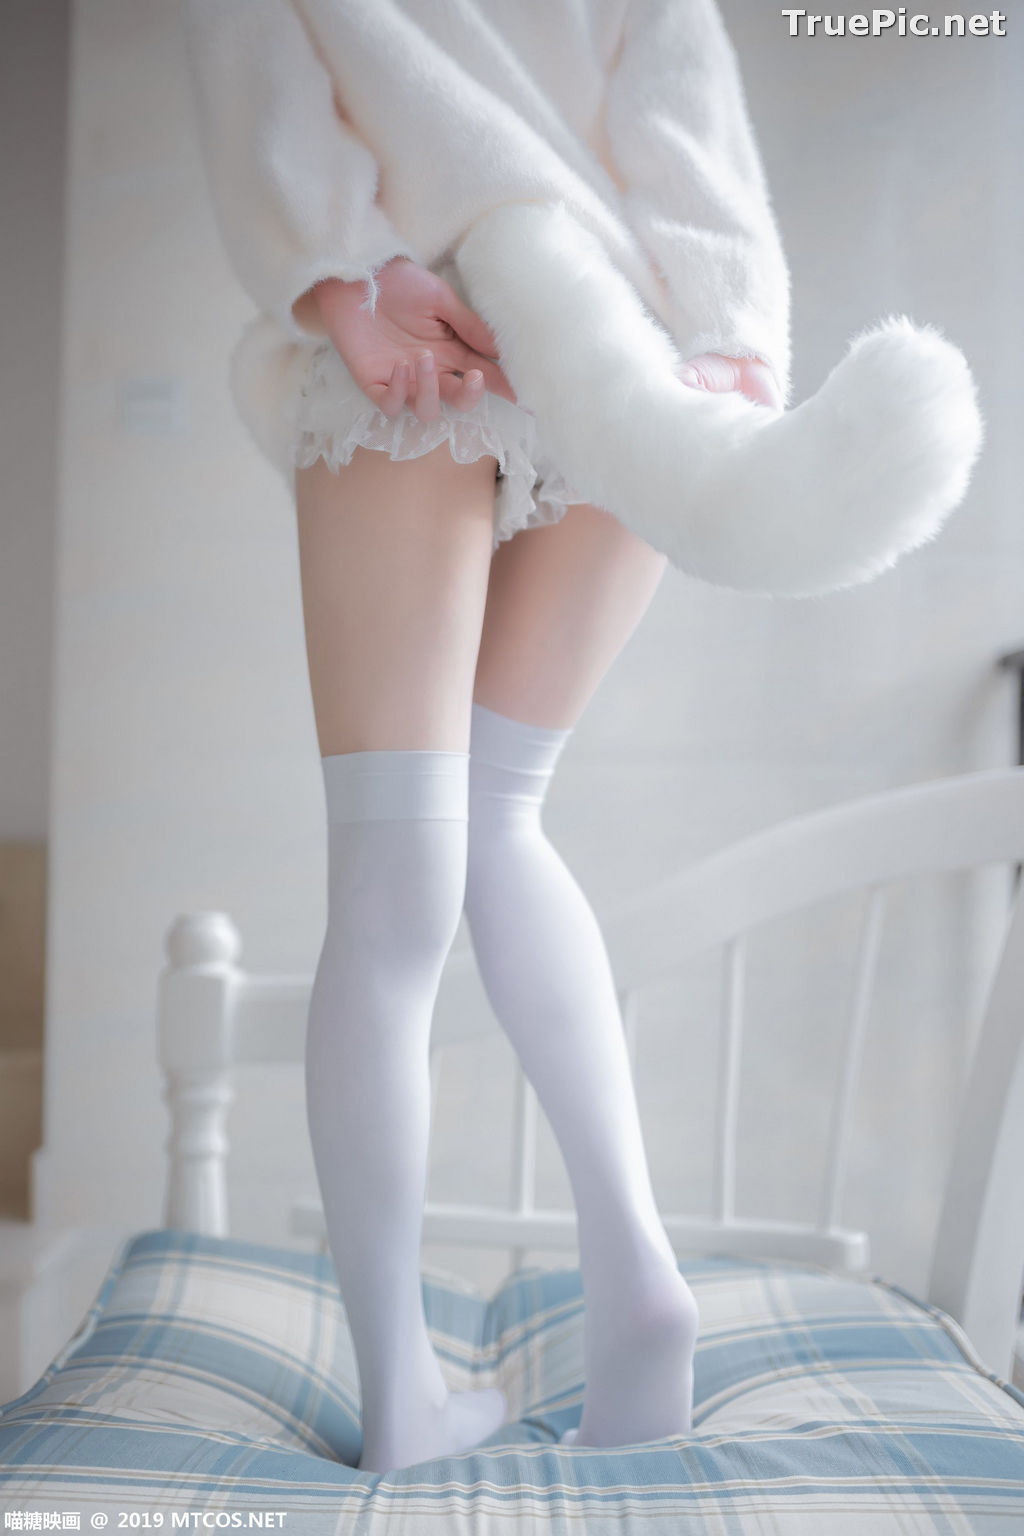 Image [MTCos] 喵糖映画 Vol.027 – Chinese Cute Model – Beautiful White Cat - TruePic.net - Picture-22